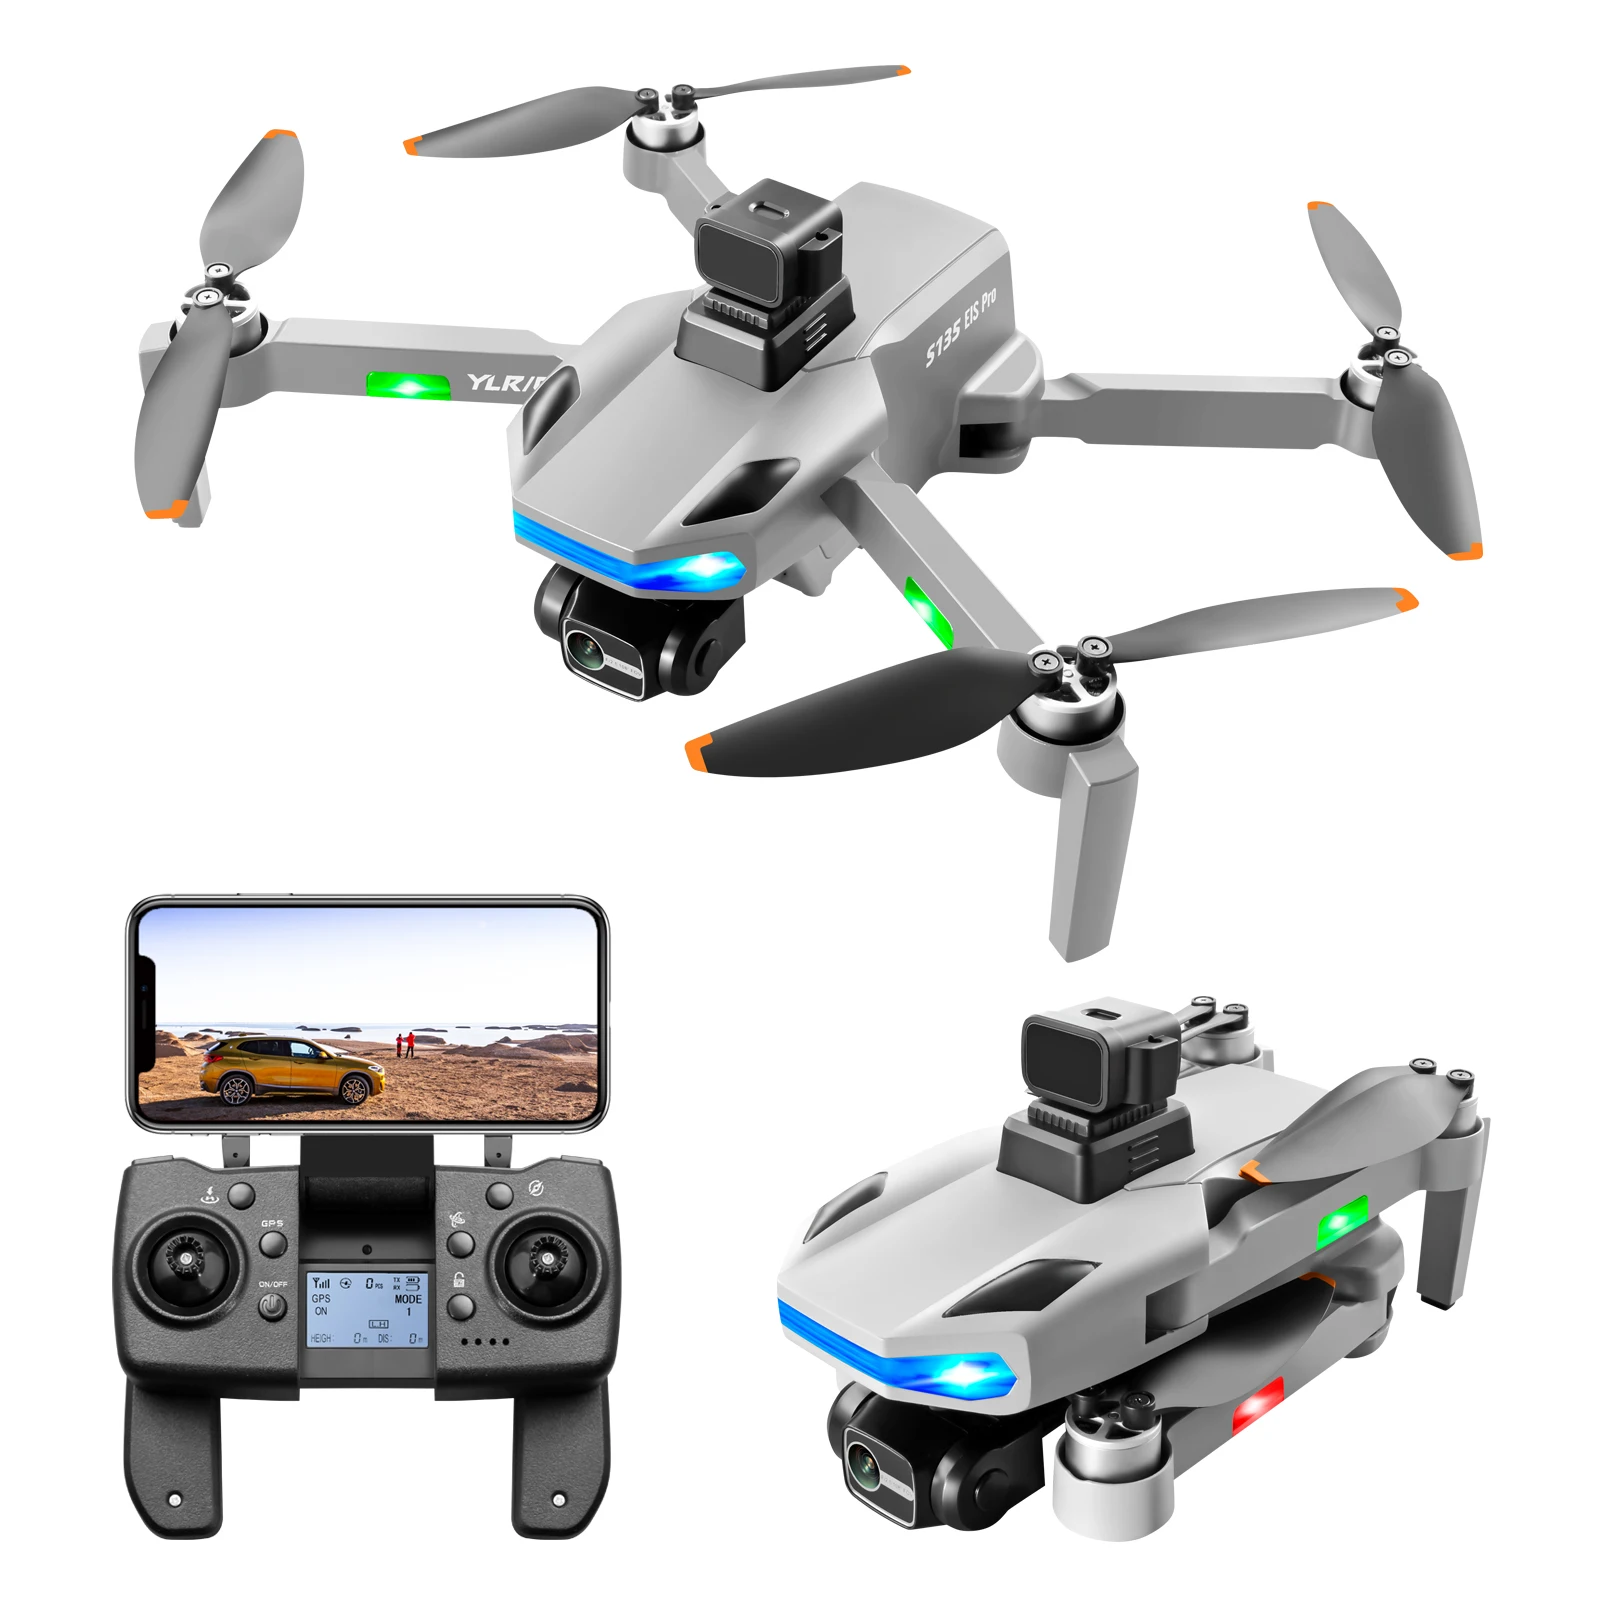 

2022 NEW GPS 5G Drone Dual HD Camera Professional Aerial Photography Brushless Foldable Quadcopter With Radar obstacle avoidance